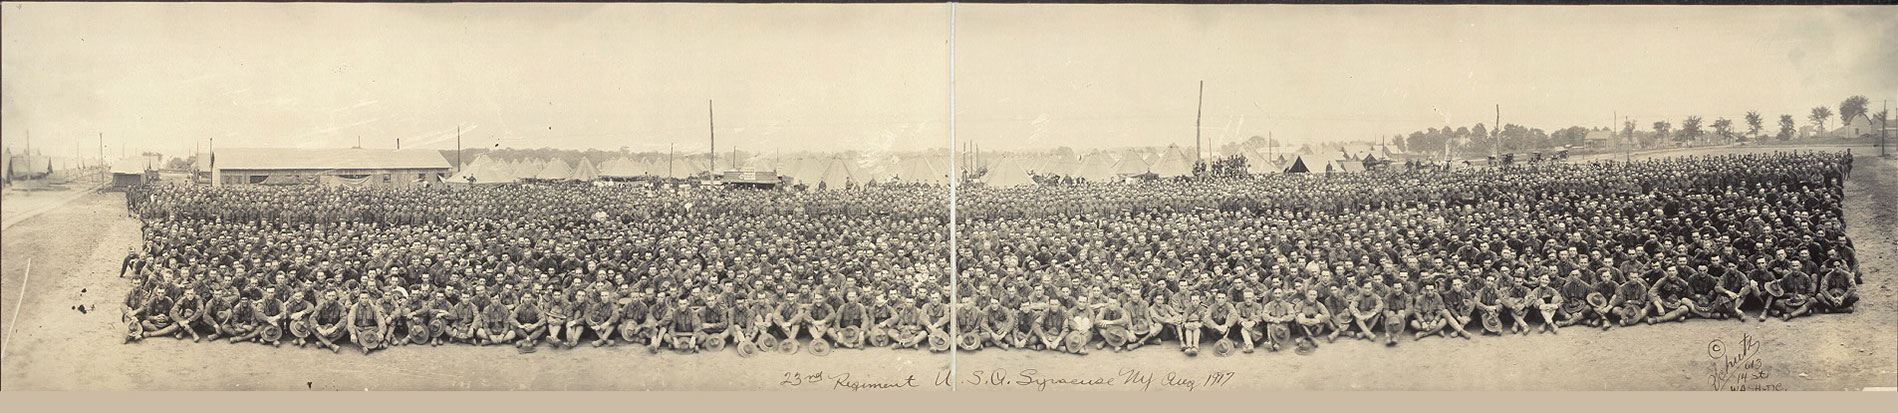 The U.S. Army’s 23rd Infantry Regiment in 1917 in Syracuse. (photo from the Library of Congress)